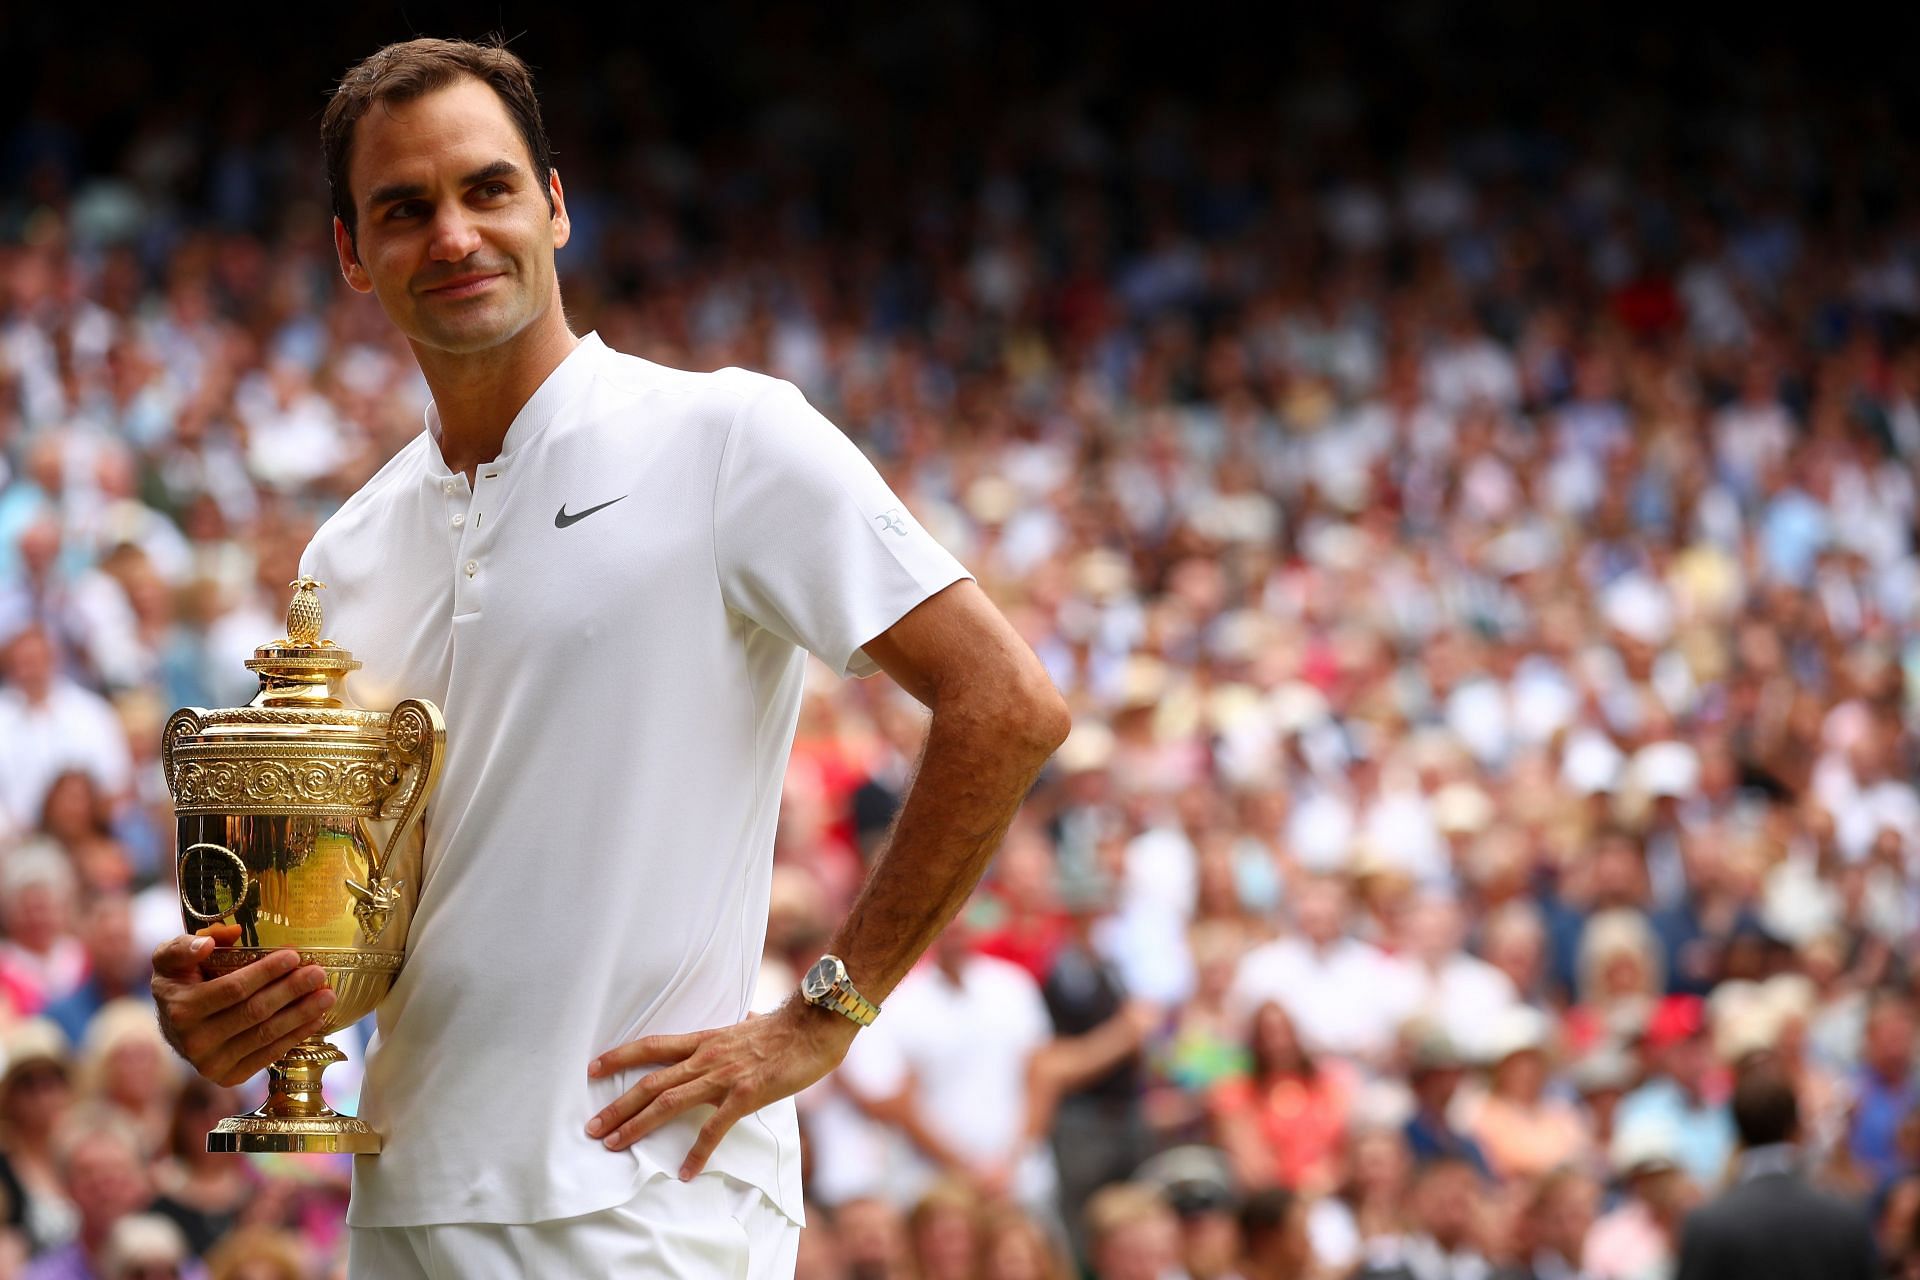 Federer has spent 237 consecutive weeks at the top spot